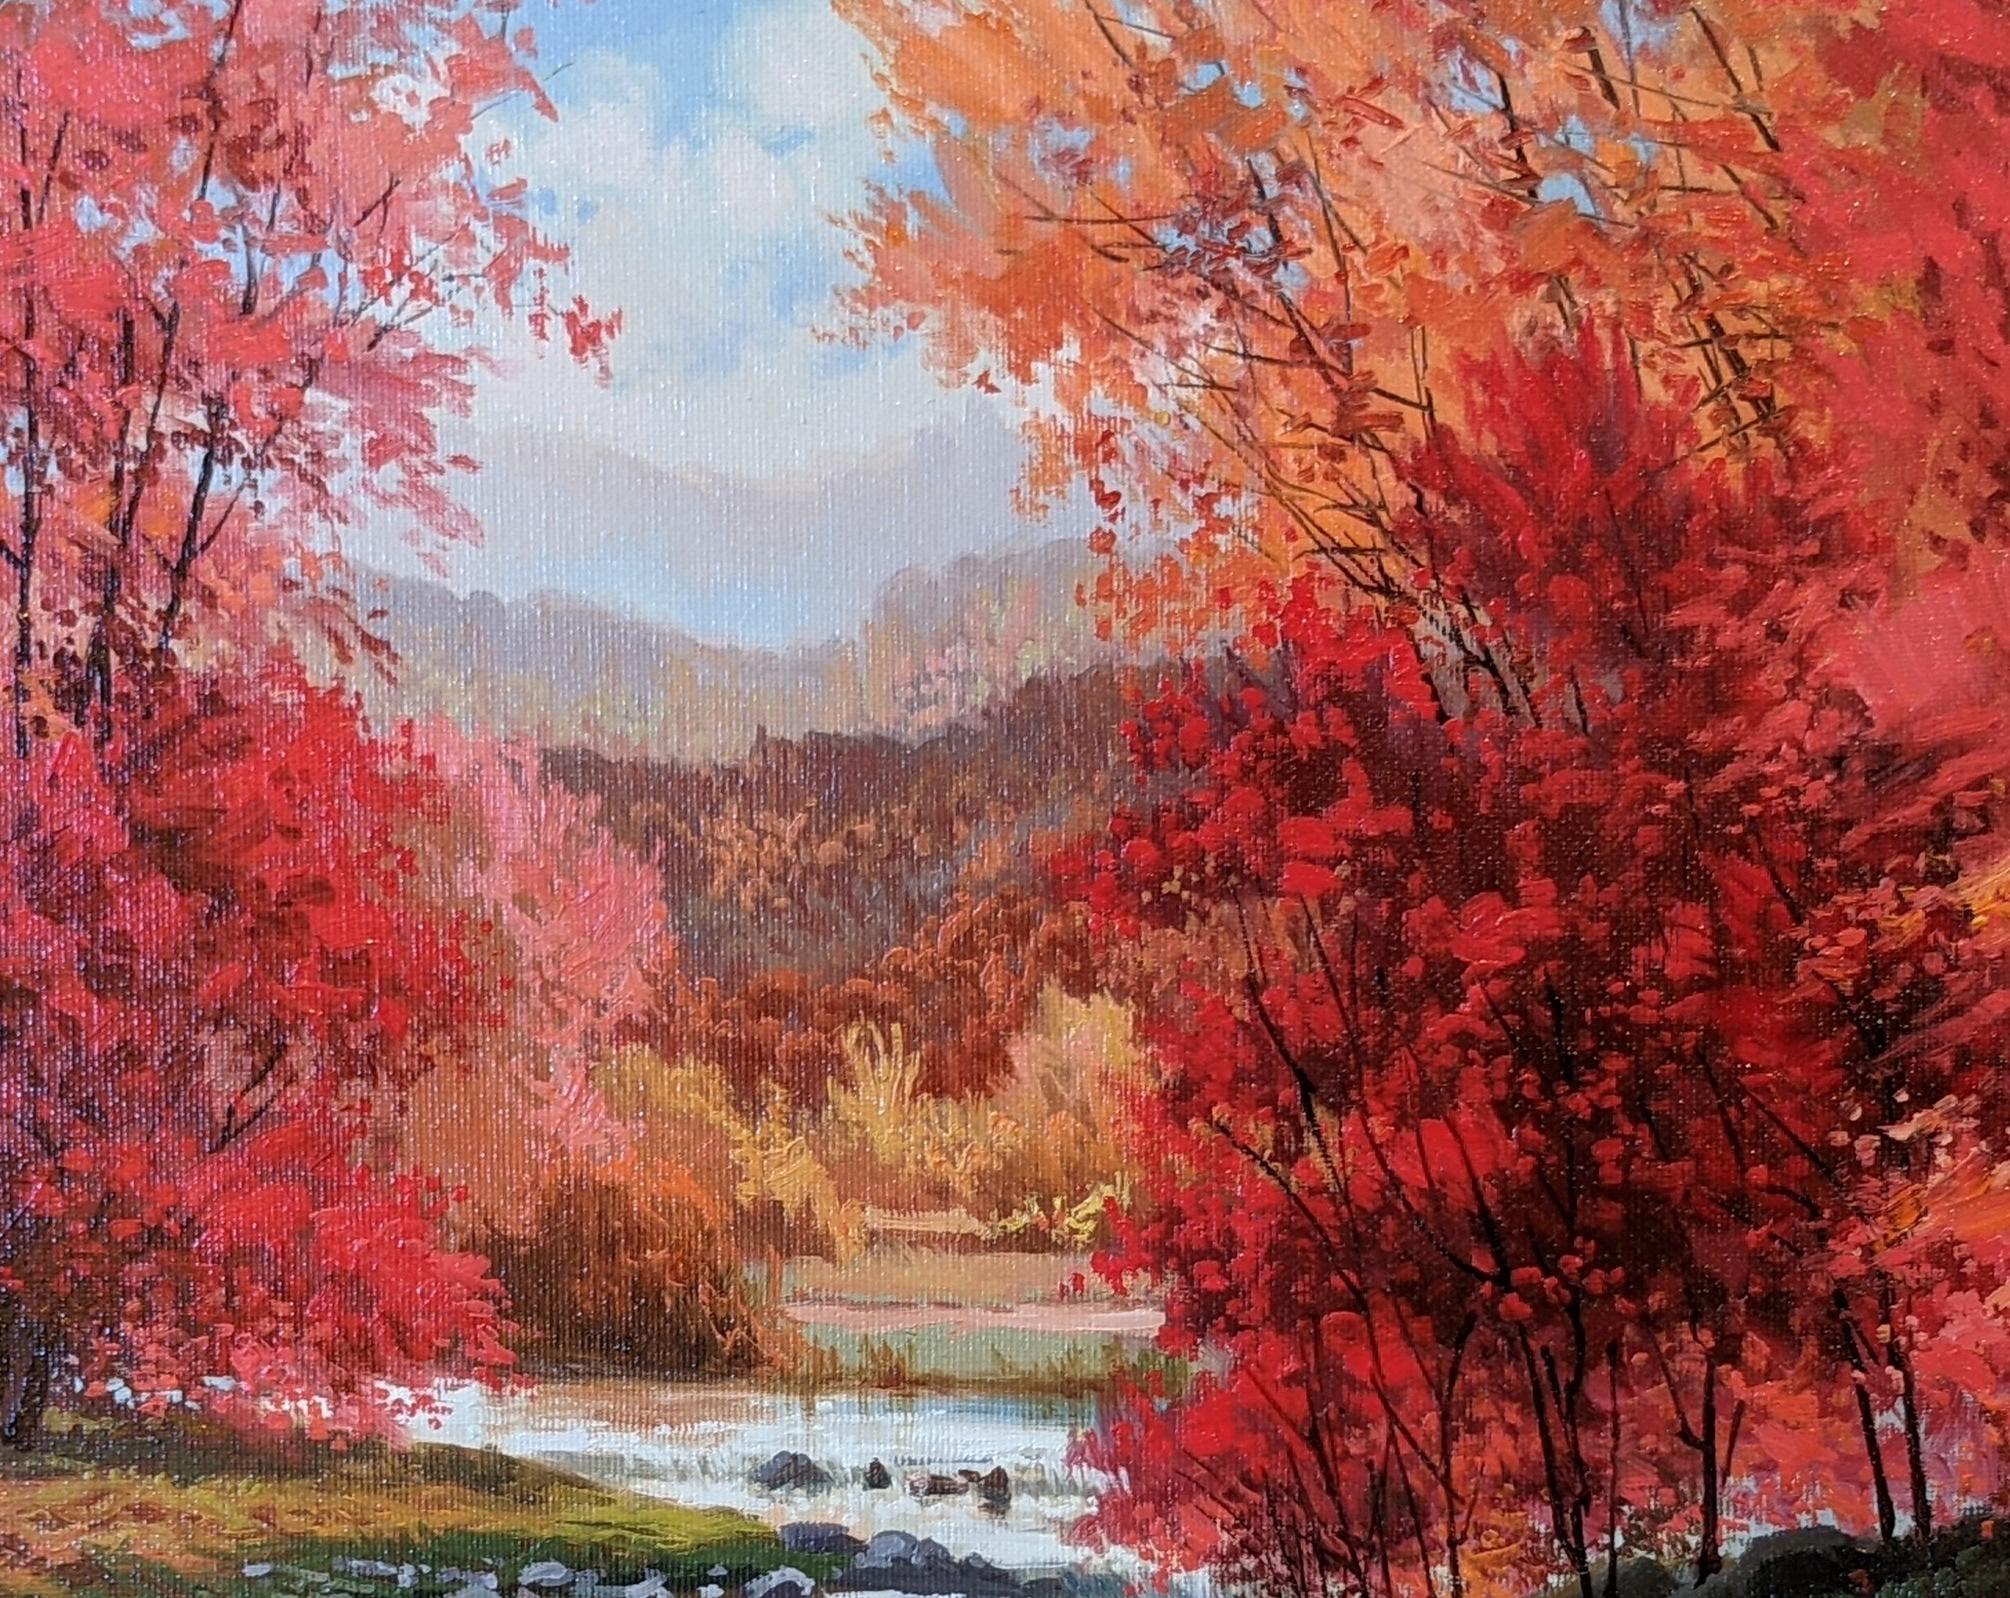 'Red Haze' by Amal Amatt. A Red Contemporary landscape painting of a river and incredibly detailed trees, with a red and orange colour palette. 

Amatt was born in the hot arid climate of Southern Spain but fell in love with lush landscape of